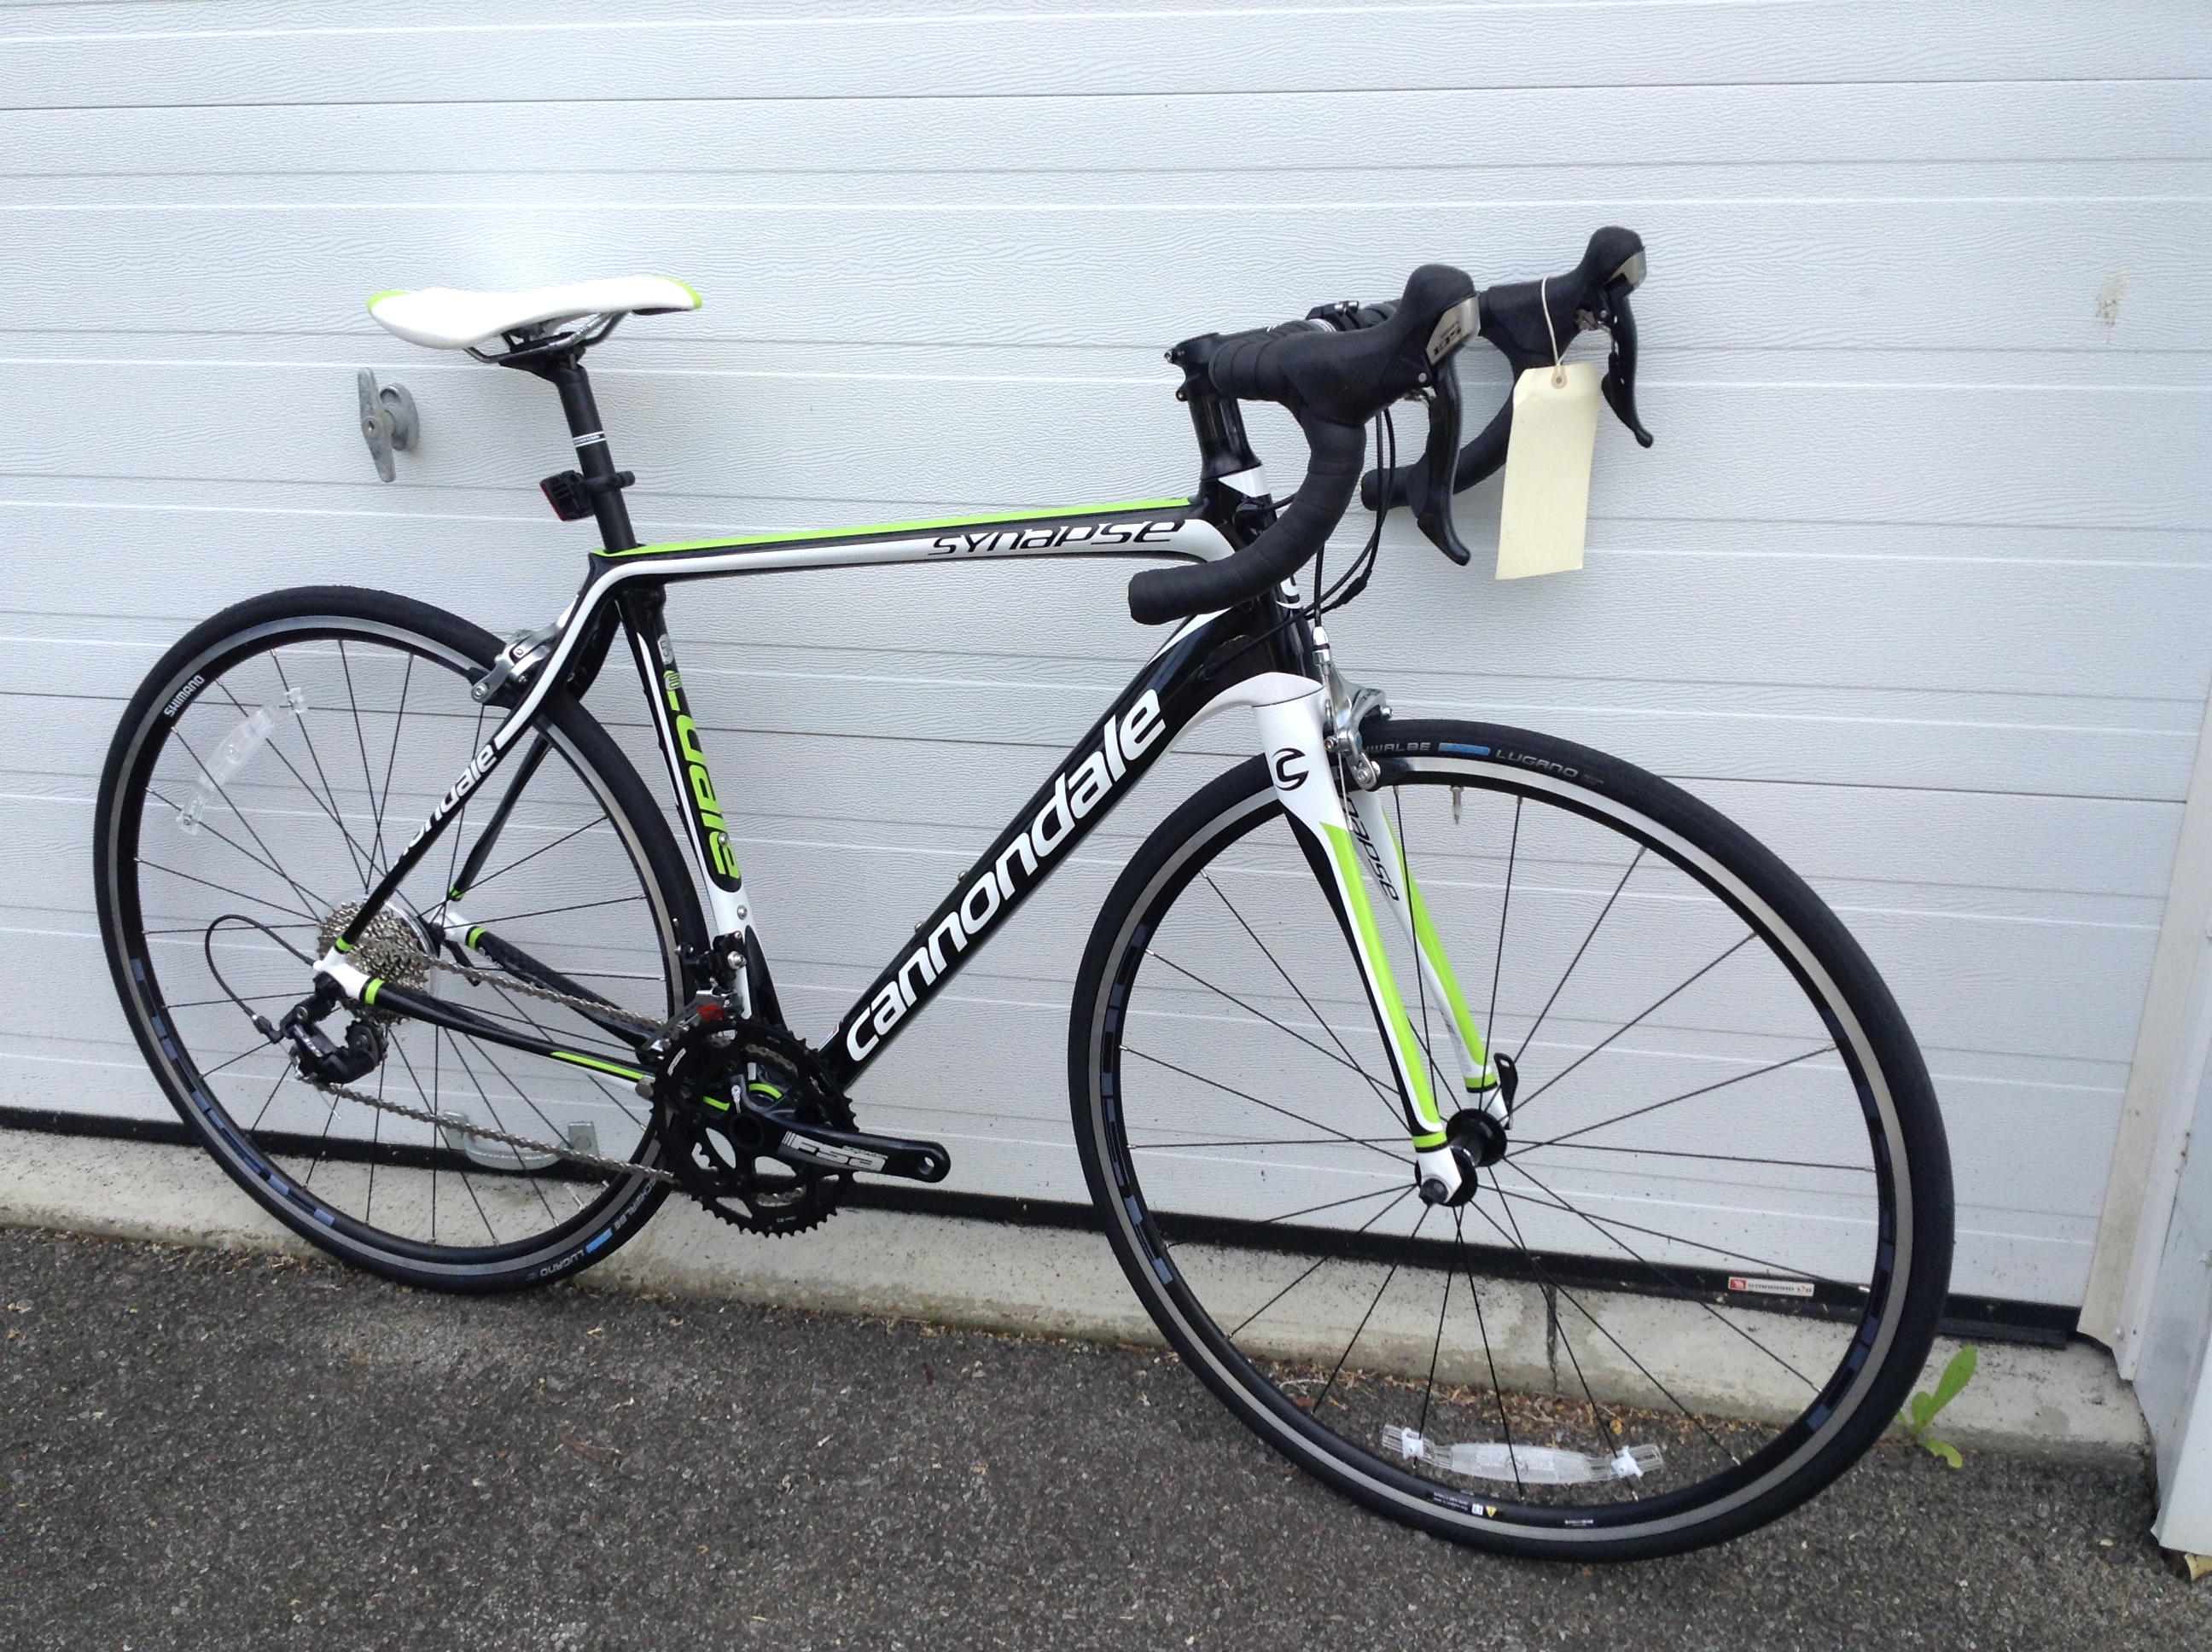 End of the year Cannondale bike SALE, up to 50% off select 2014 models